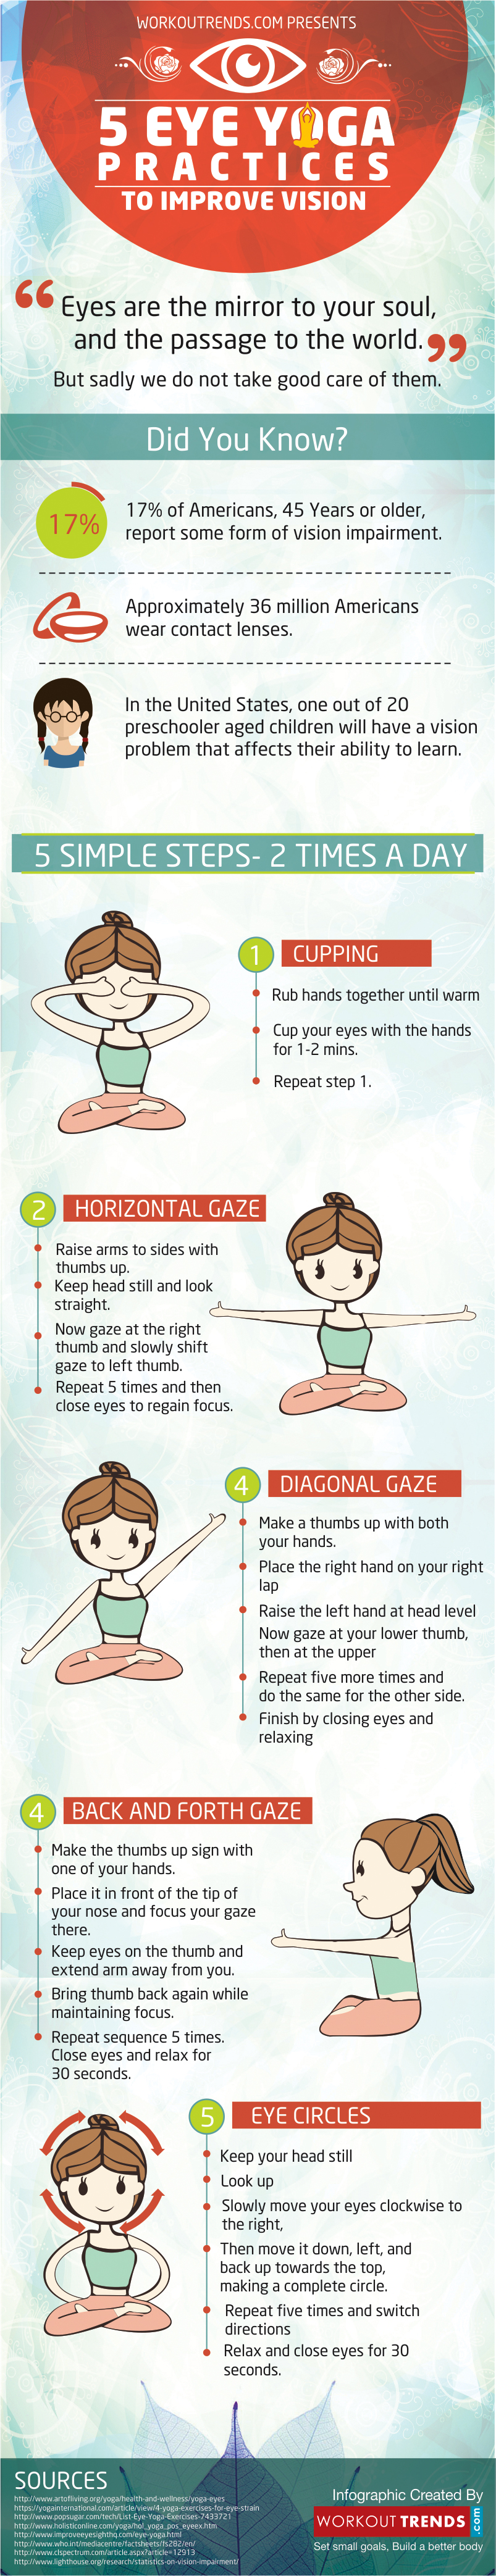 5 eyes yoga practices for better vision